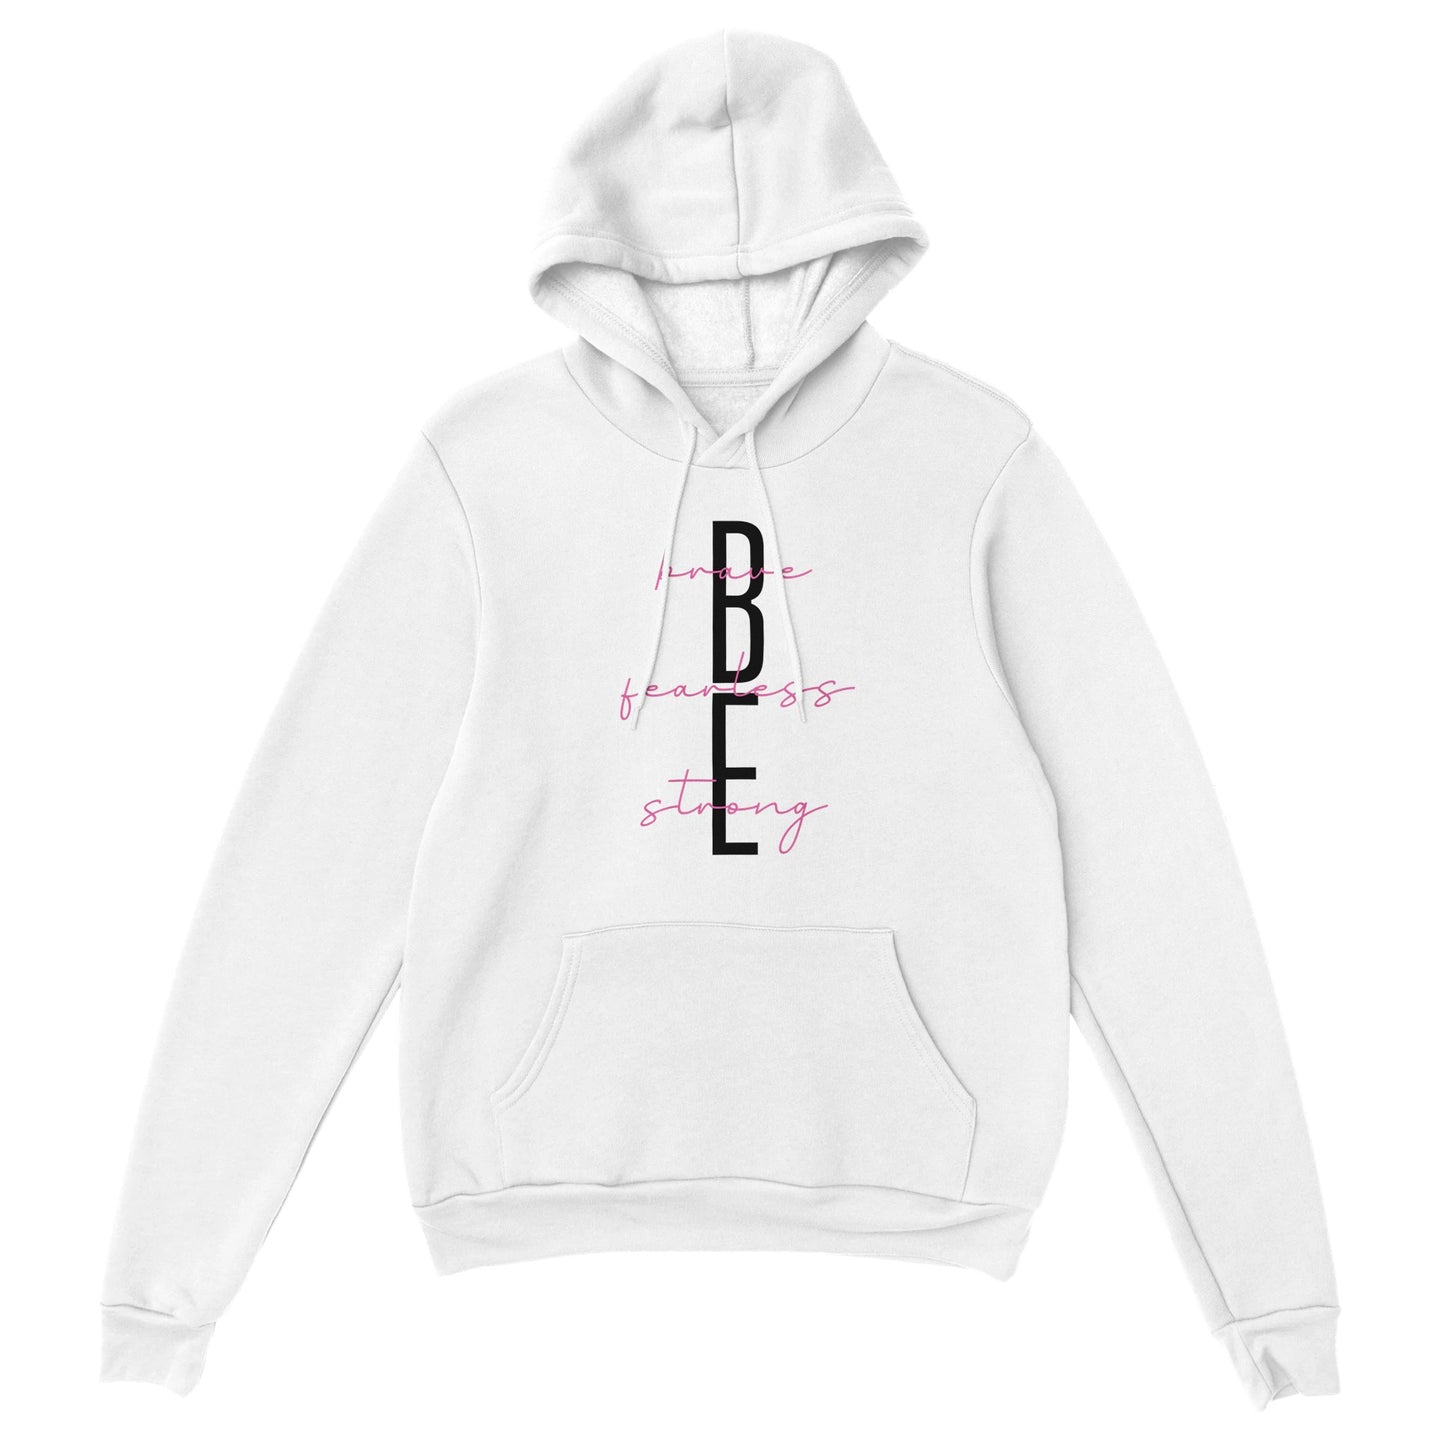 Classic Unisex Pullover Hoodie | BE brave fearless strong